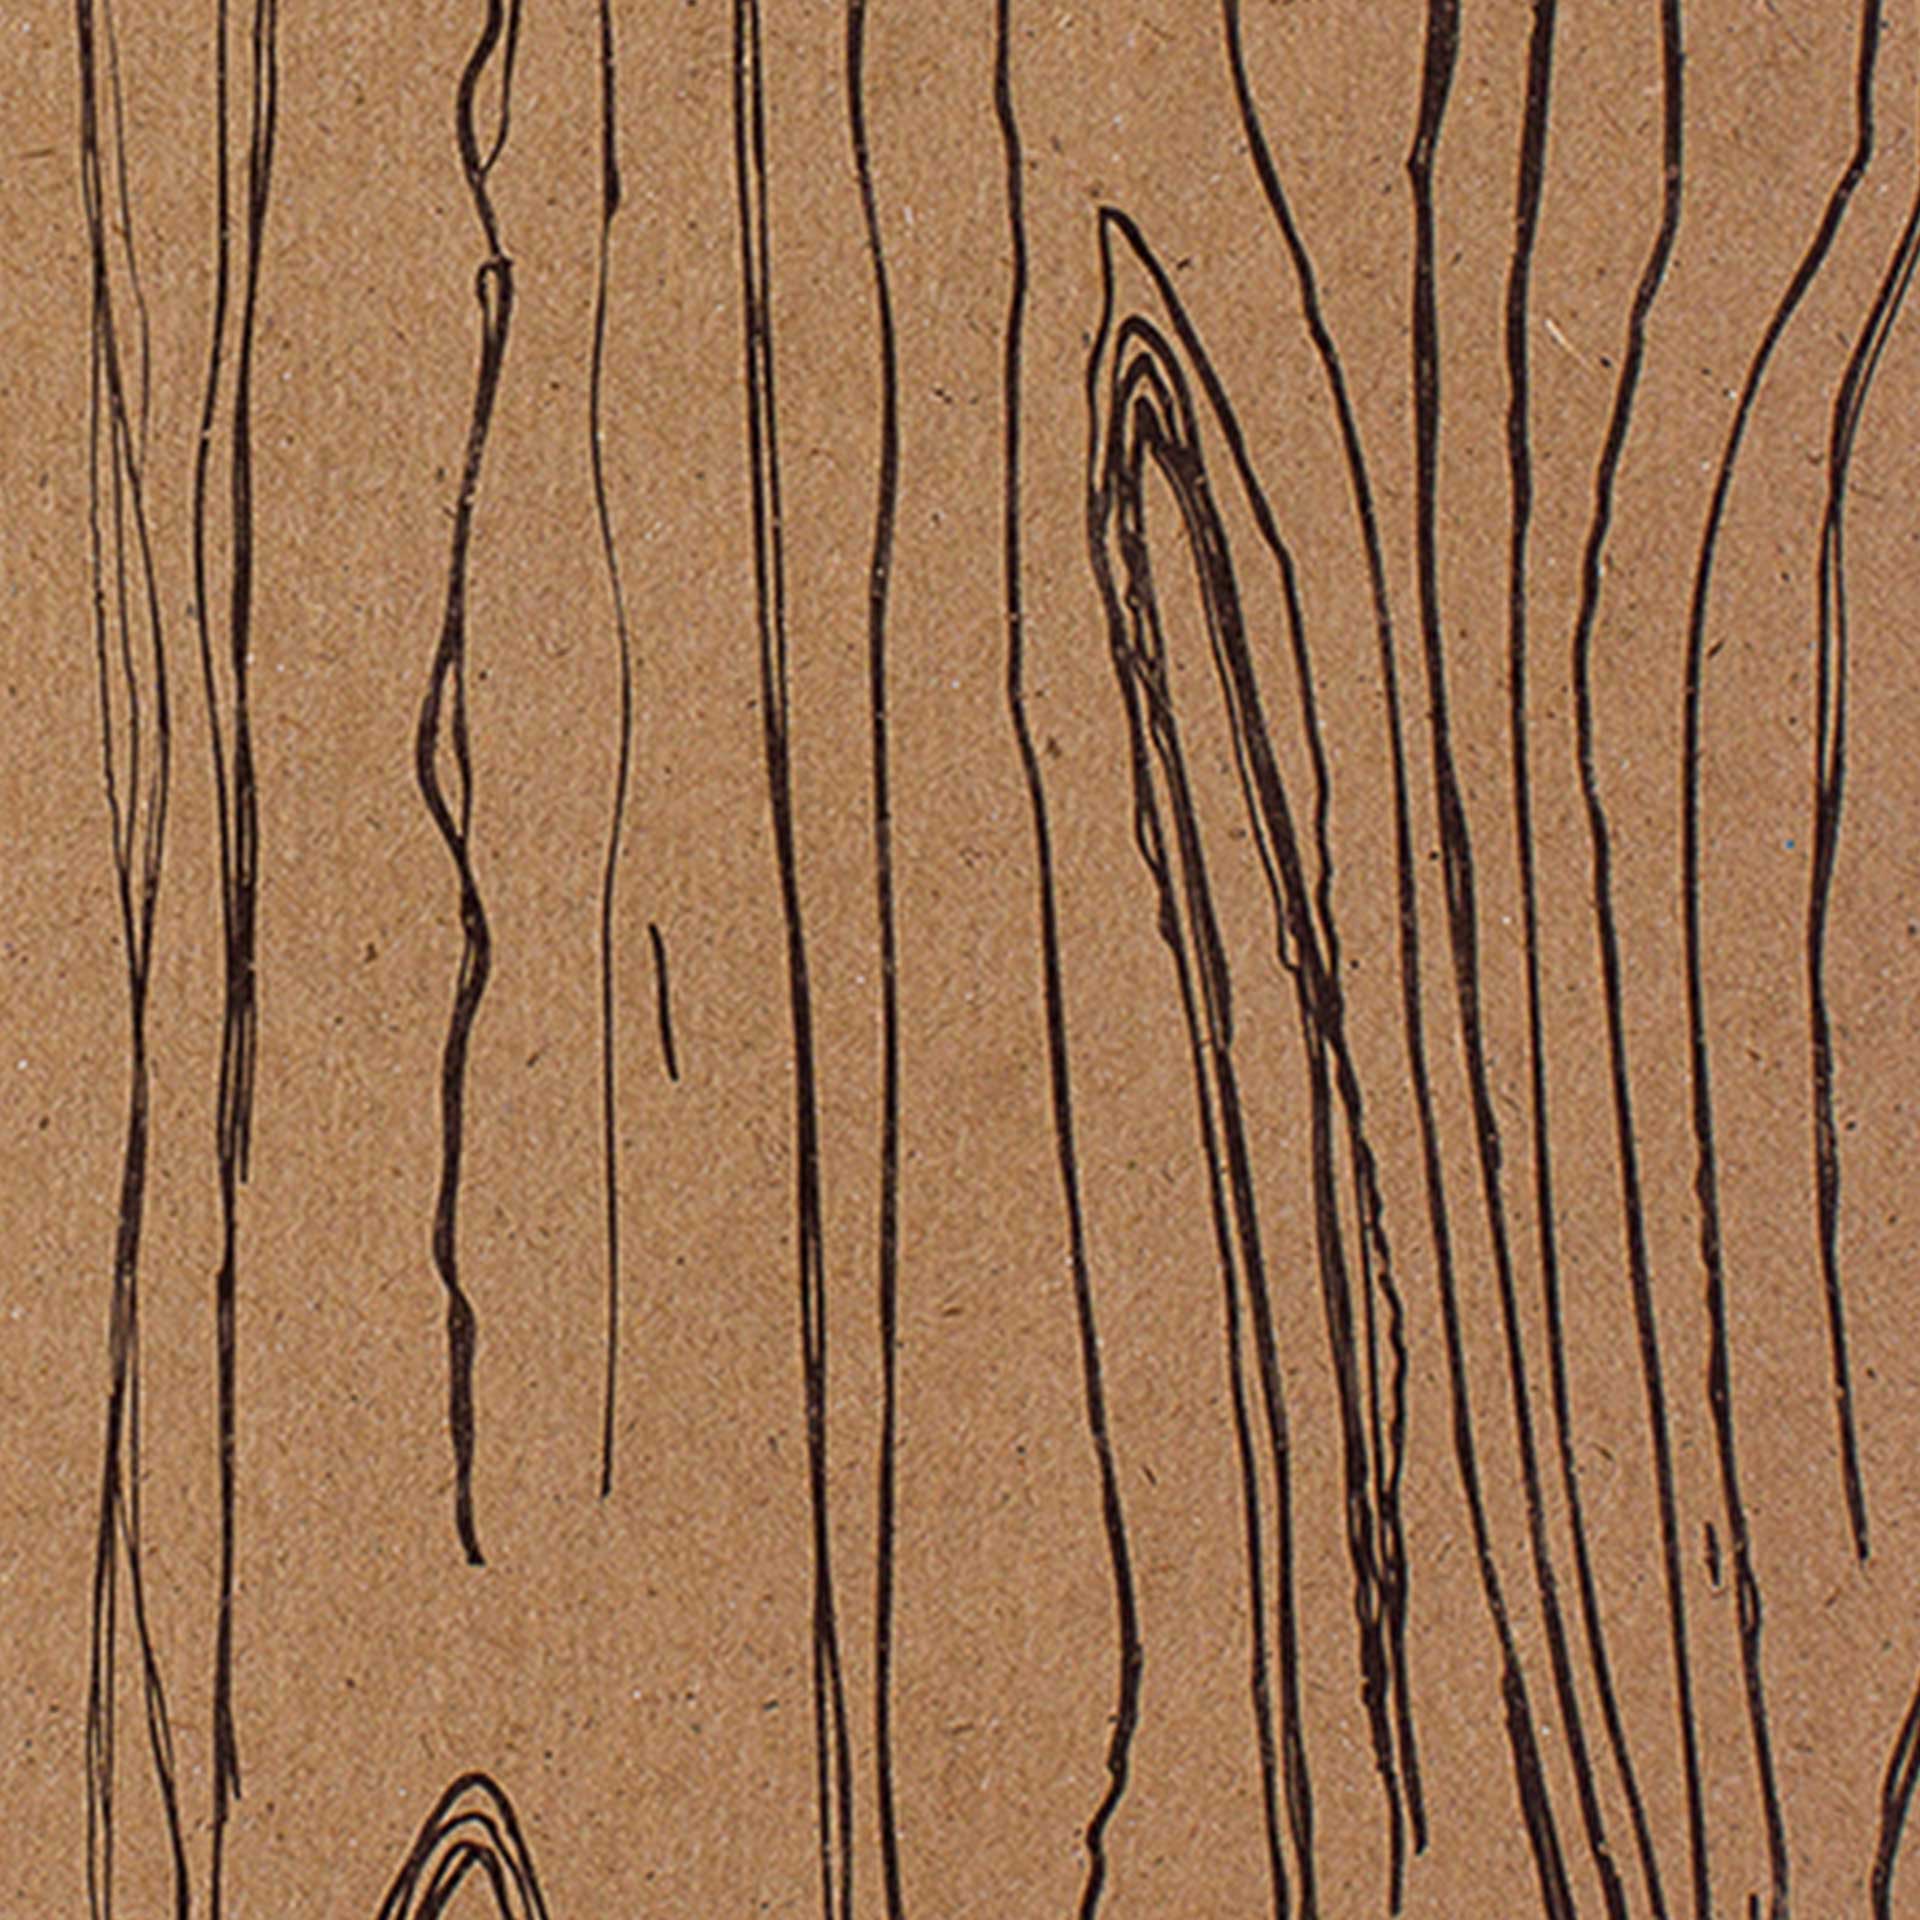 Closeup of a woodgrain pattern in black and brown